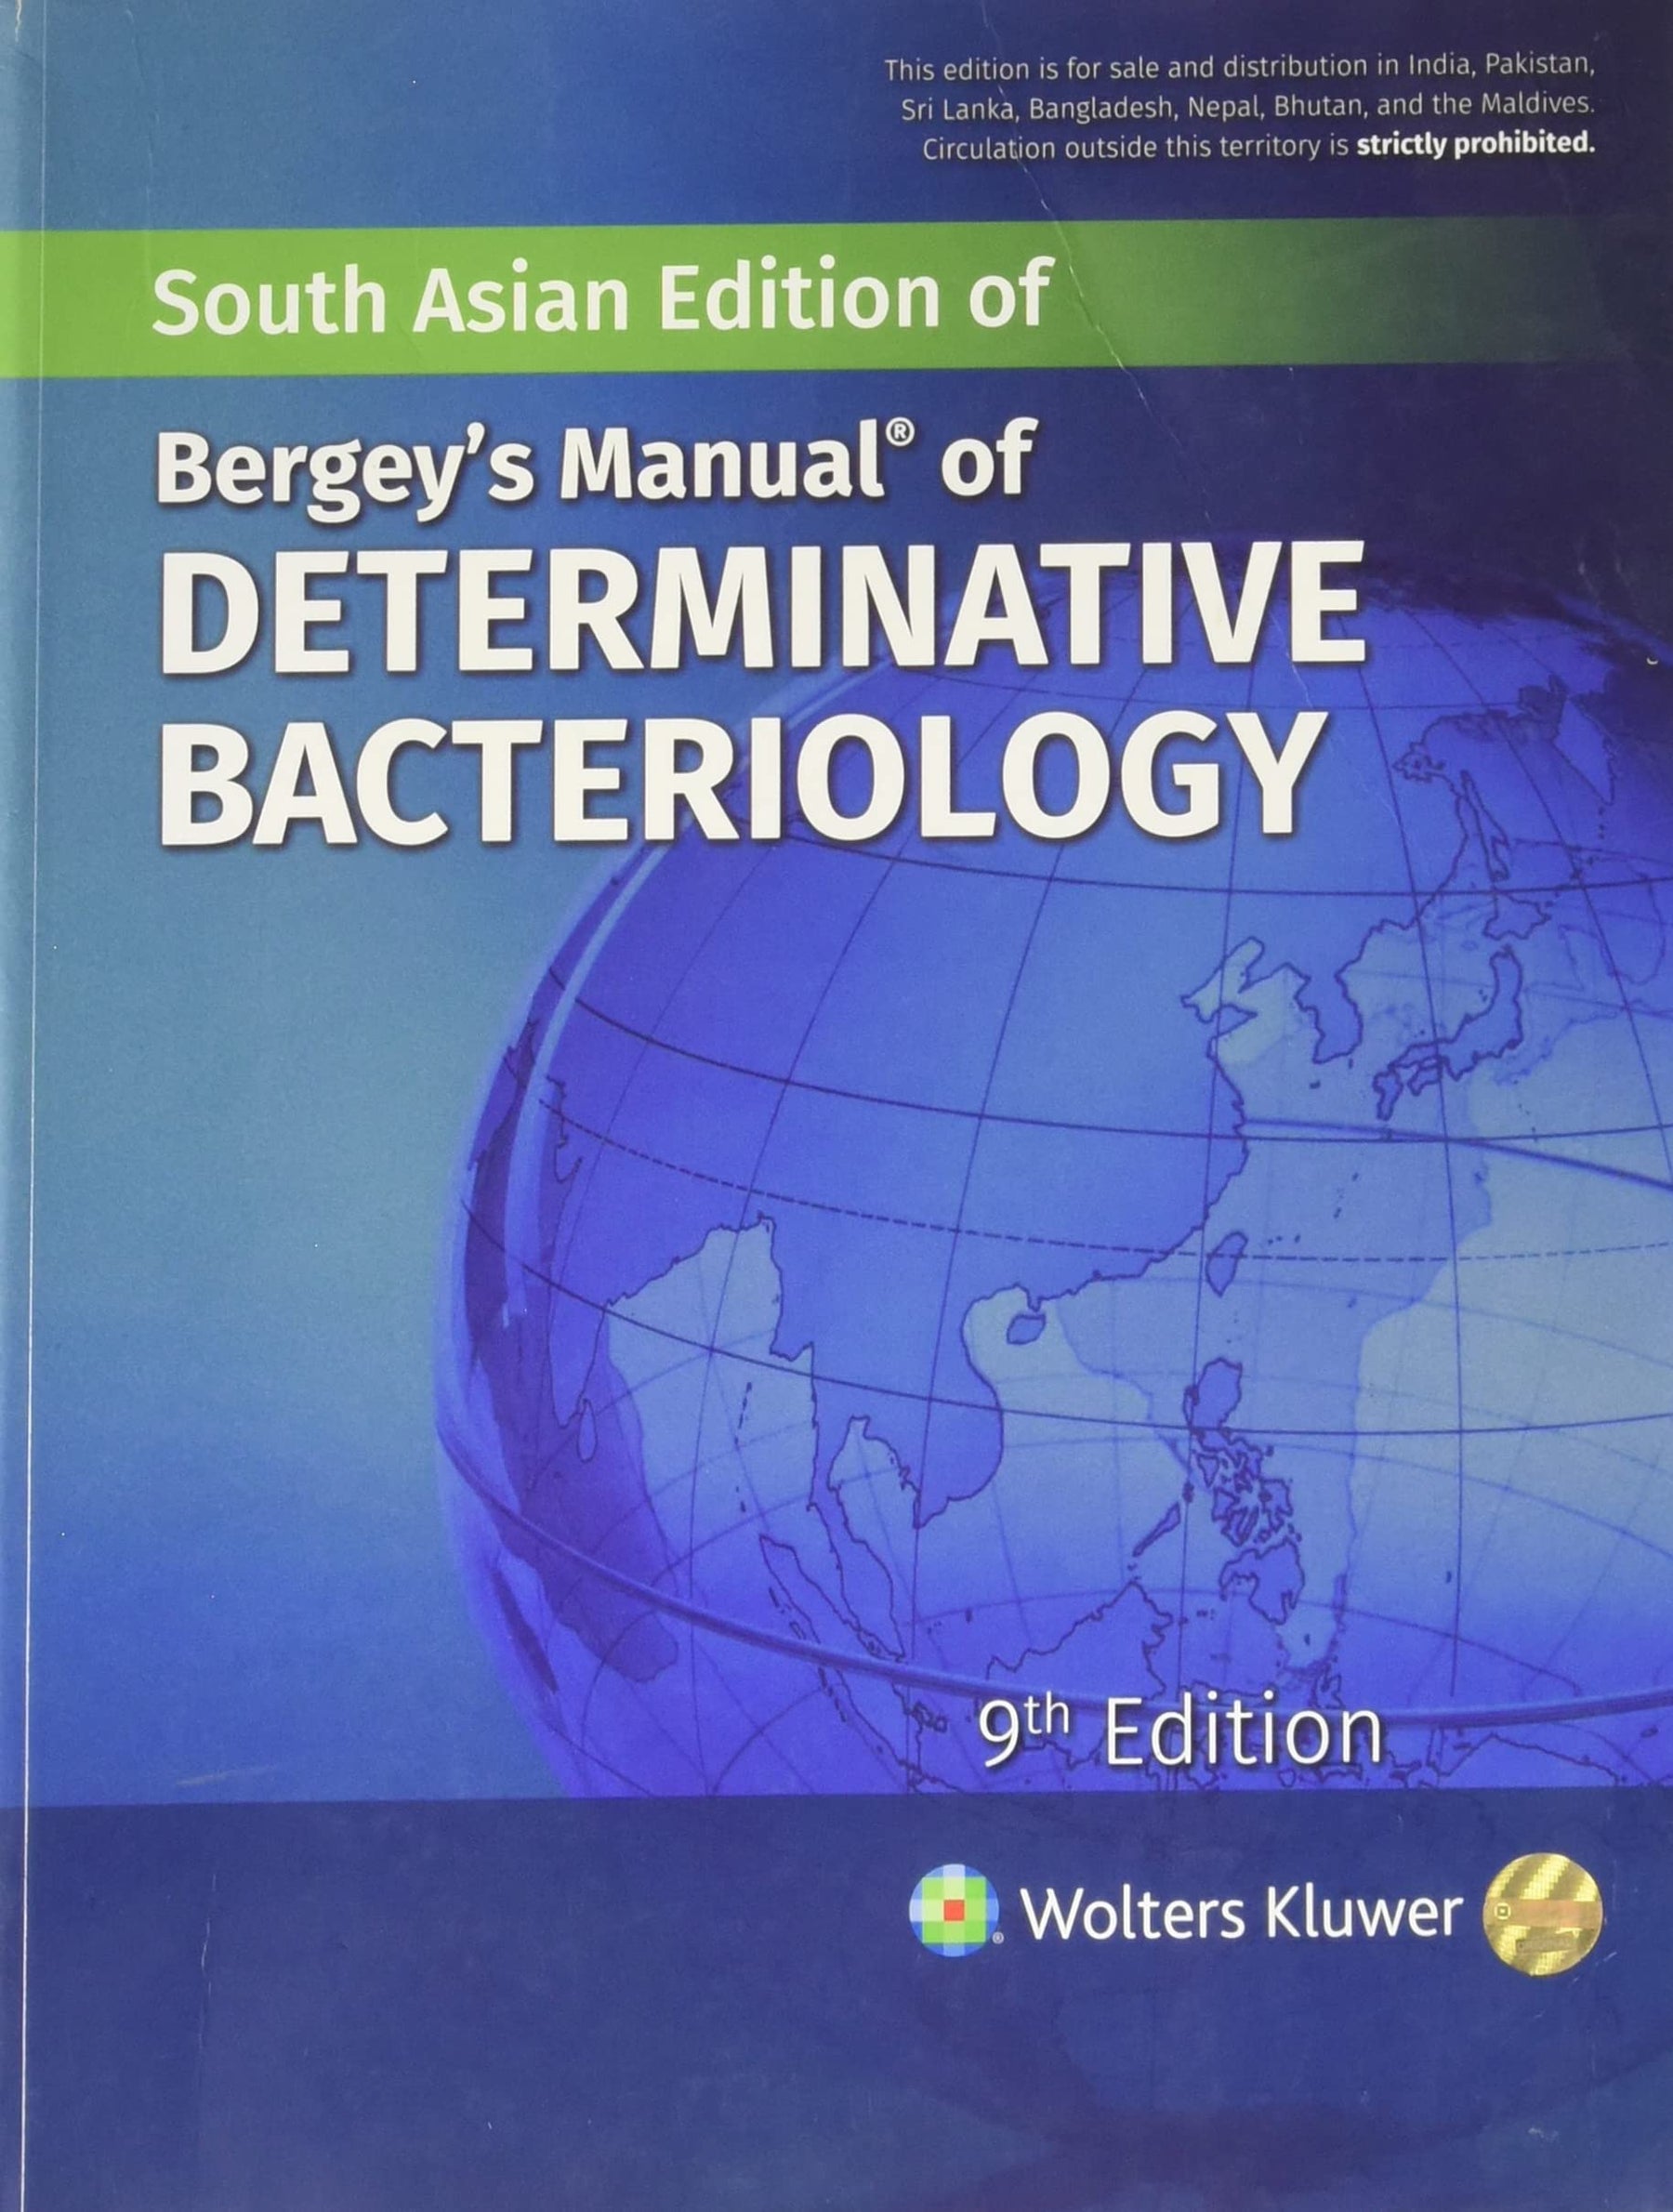 Bergey's Manual of Determinative Bacteriology, 9/e by Holt